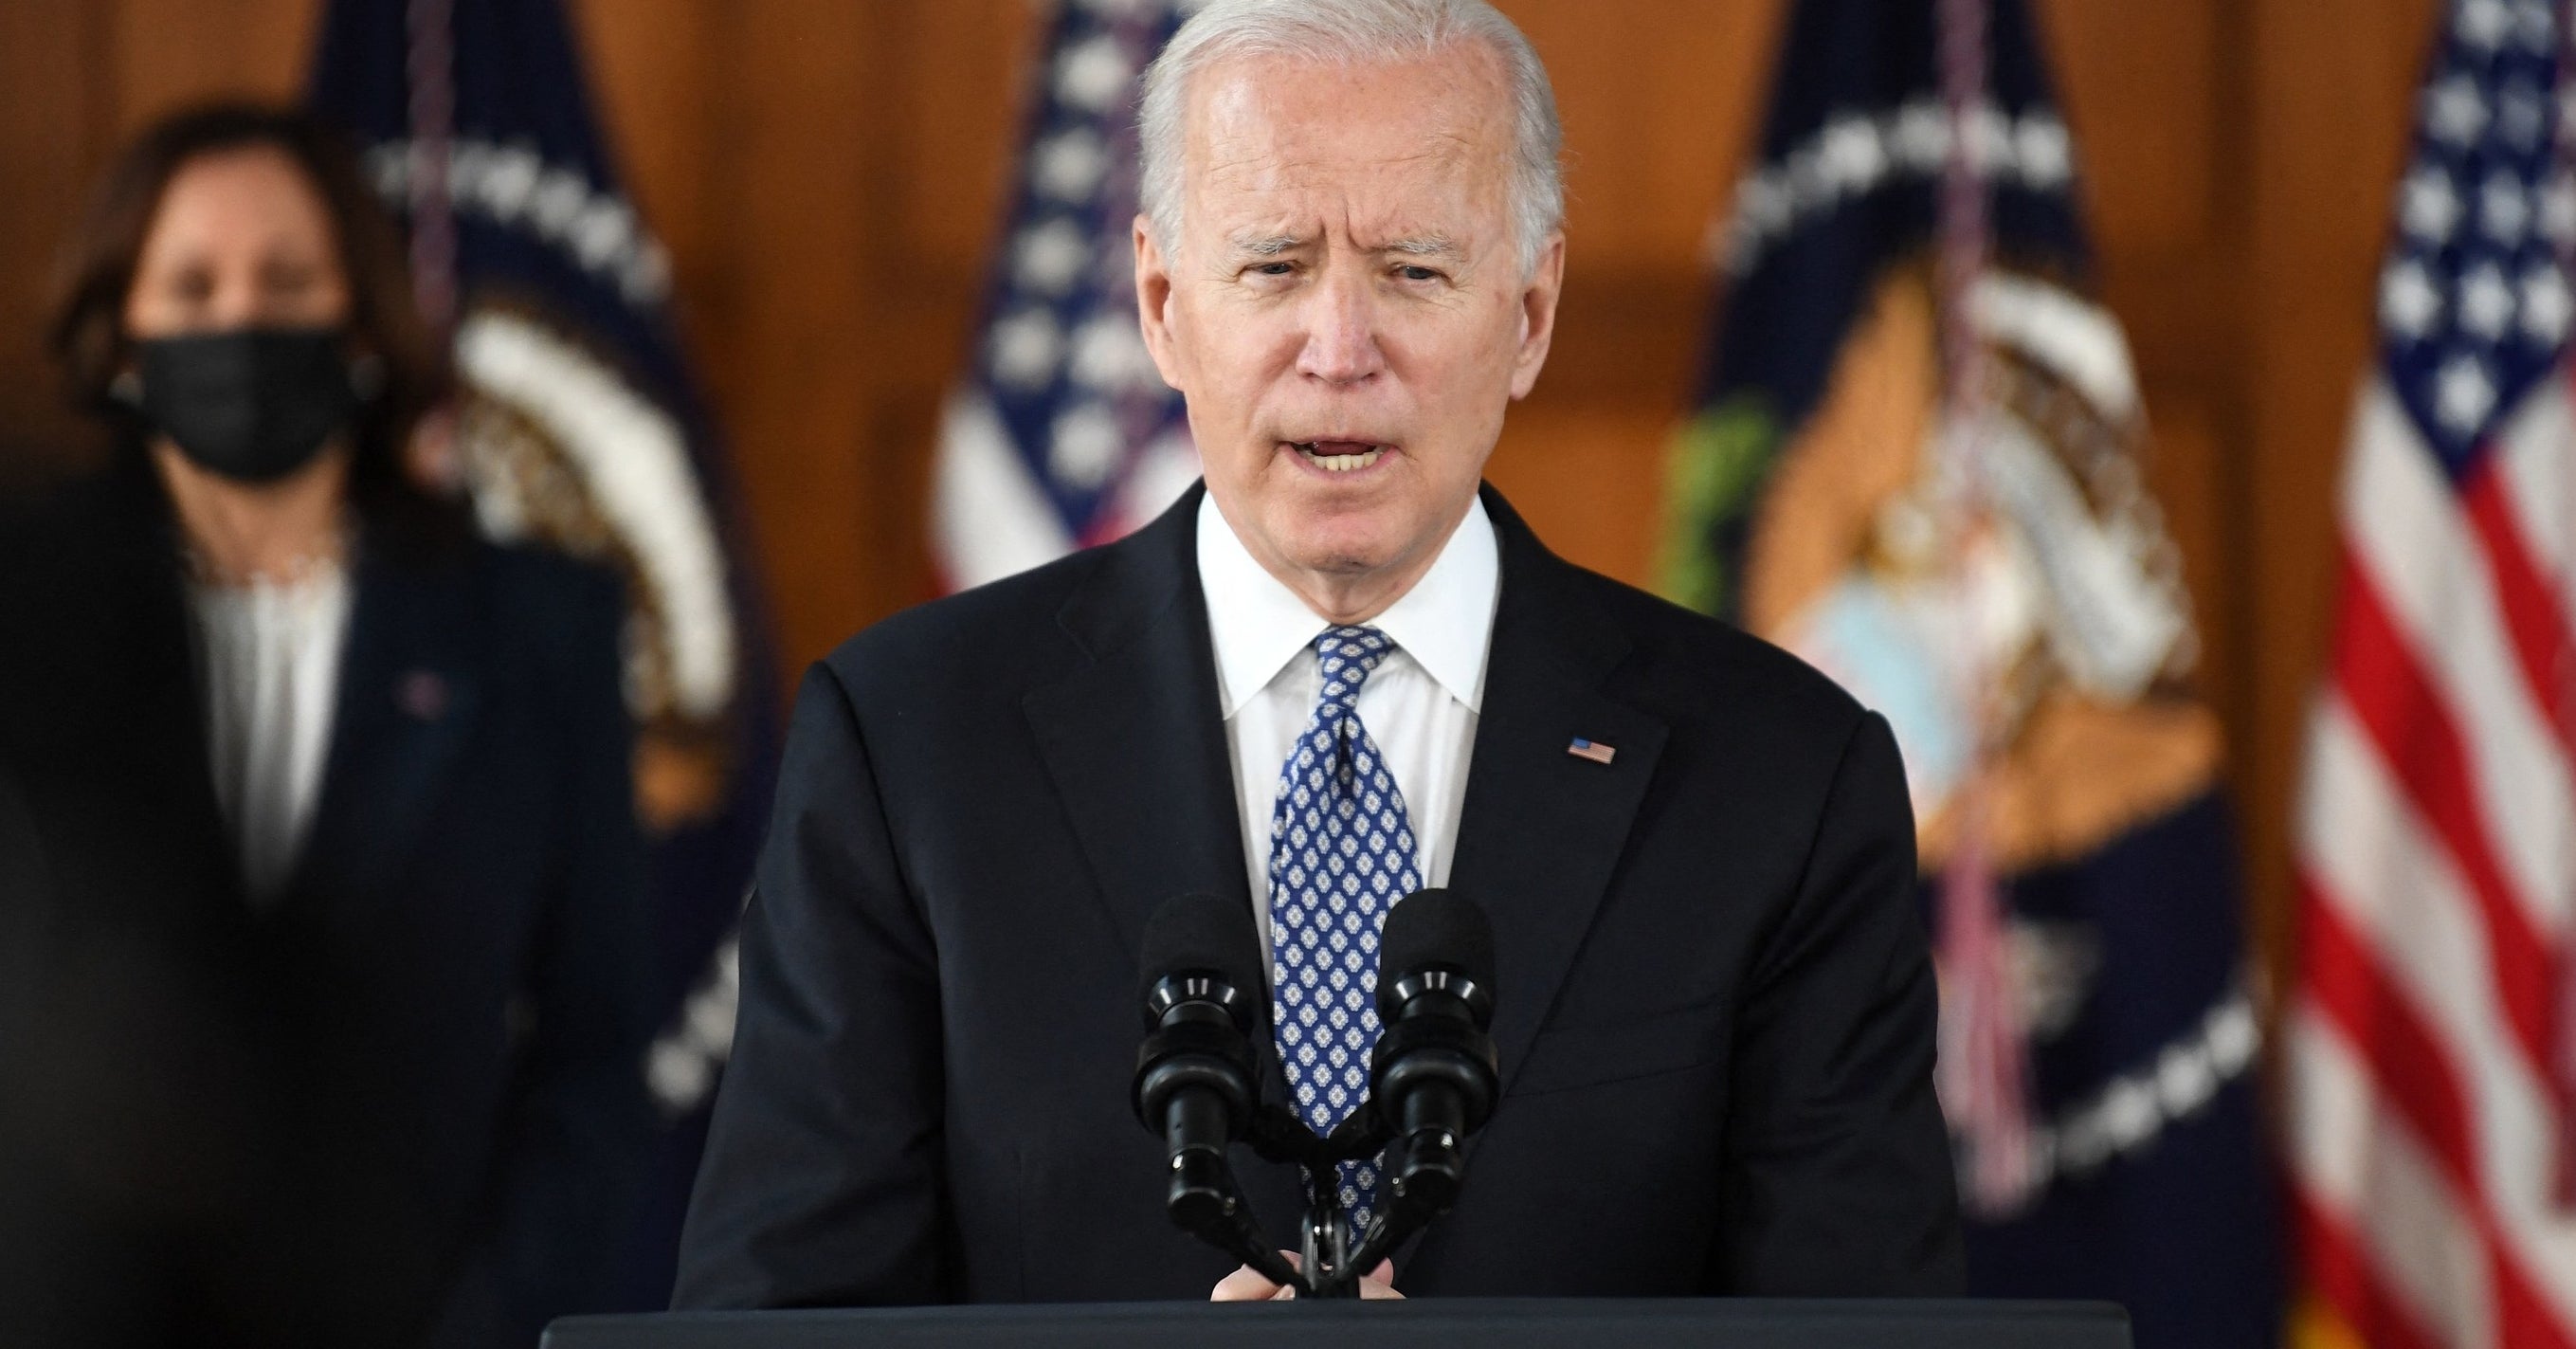 Biden and Harris condemn the “scapegoat” of Asian Americans